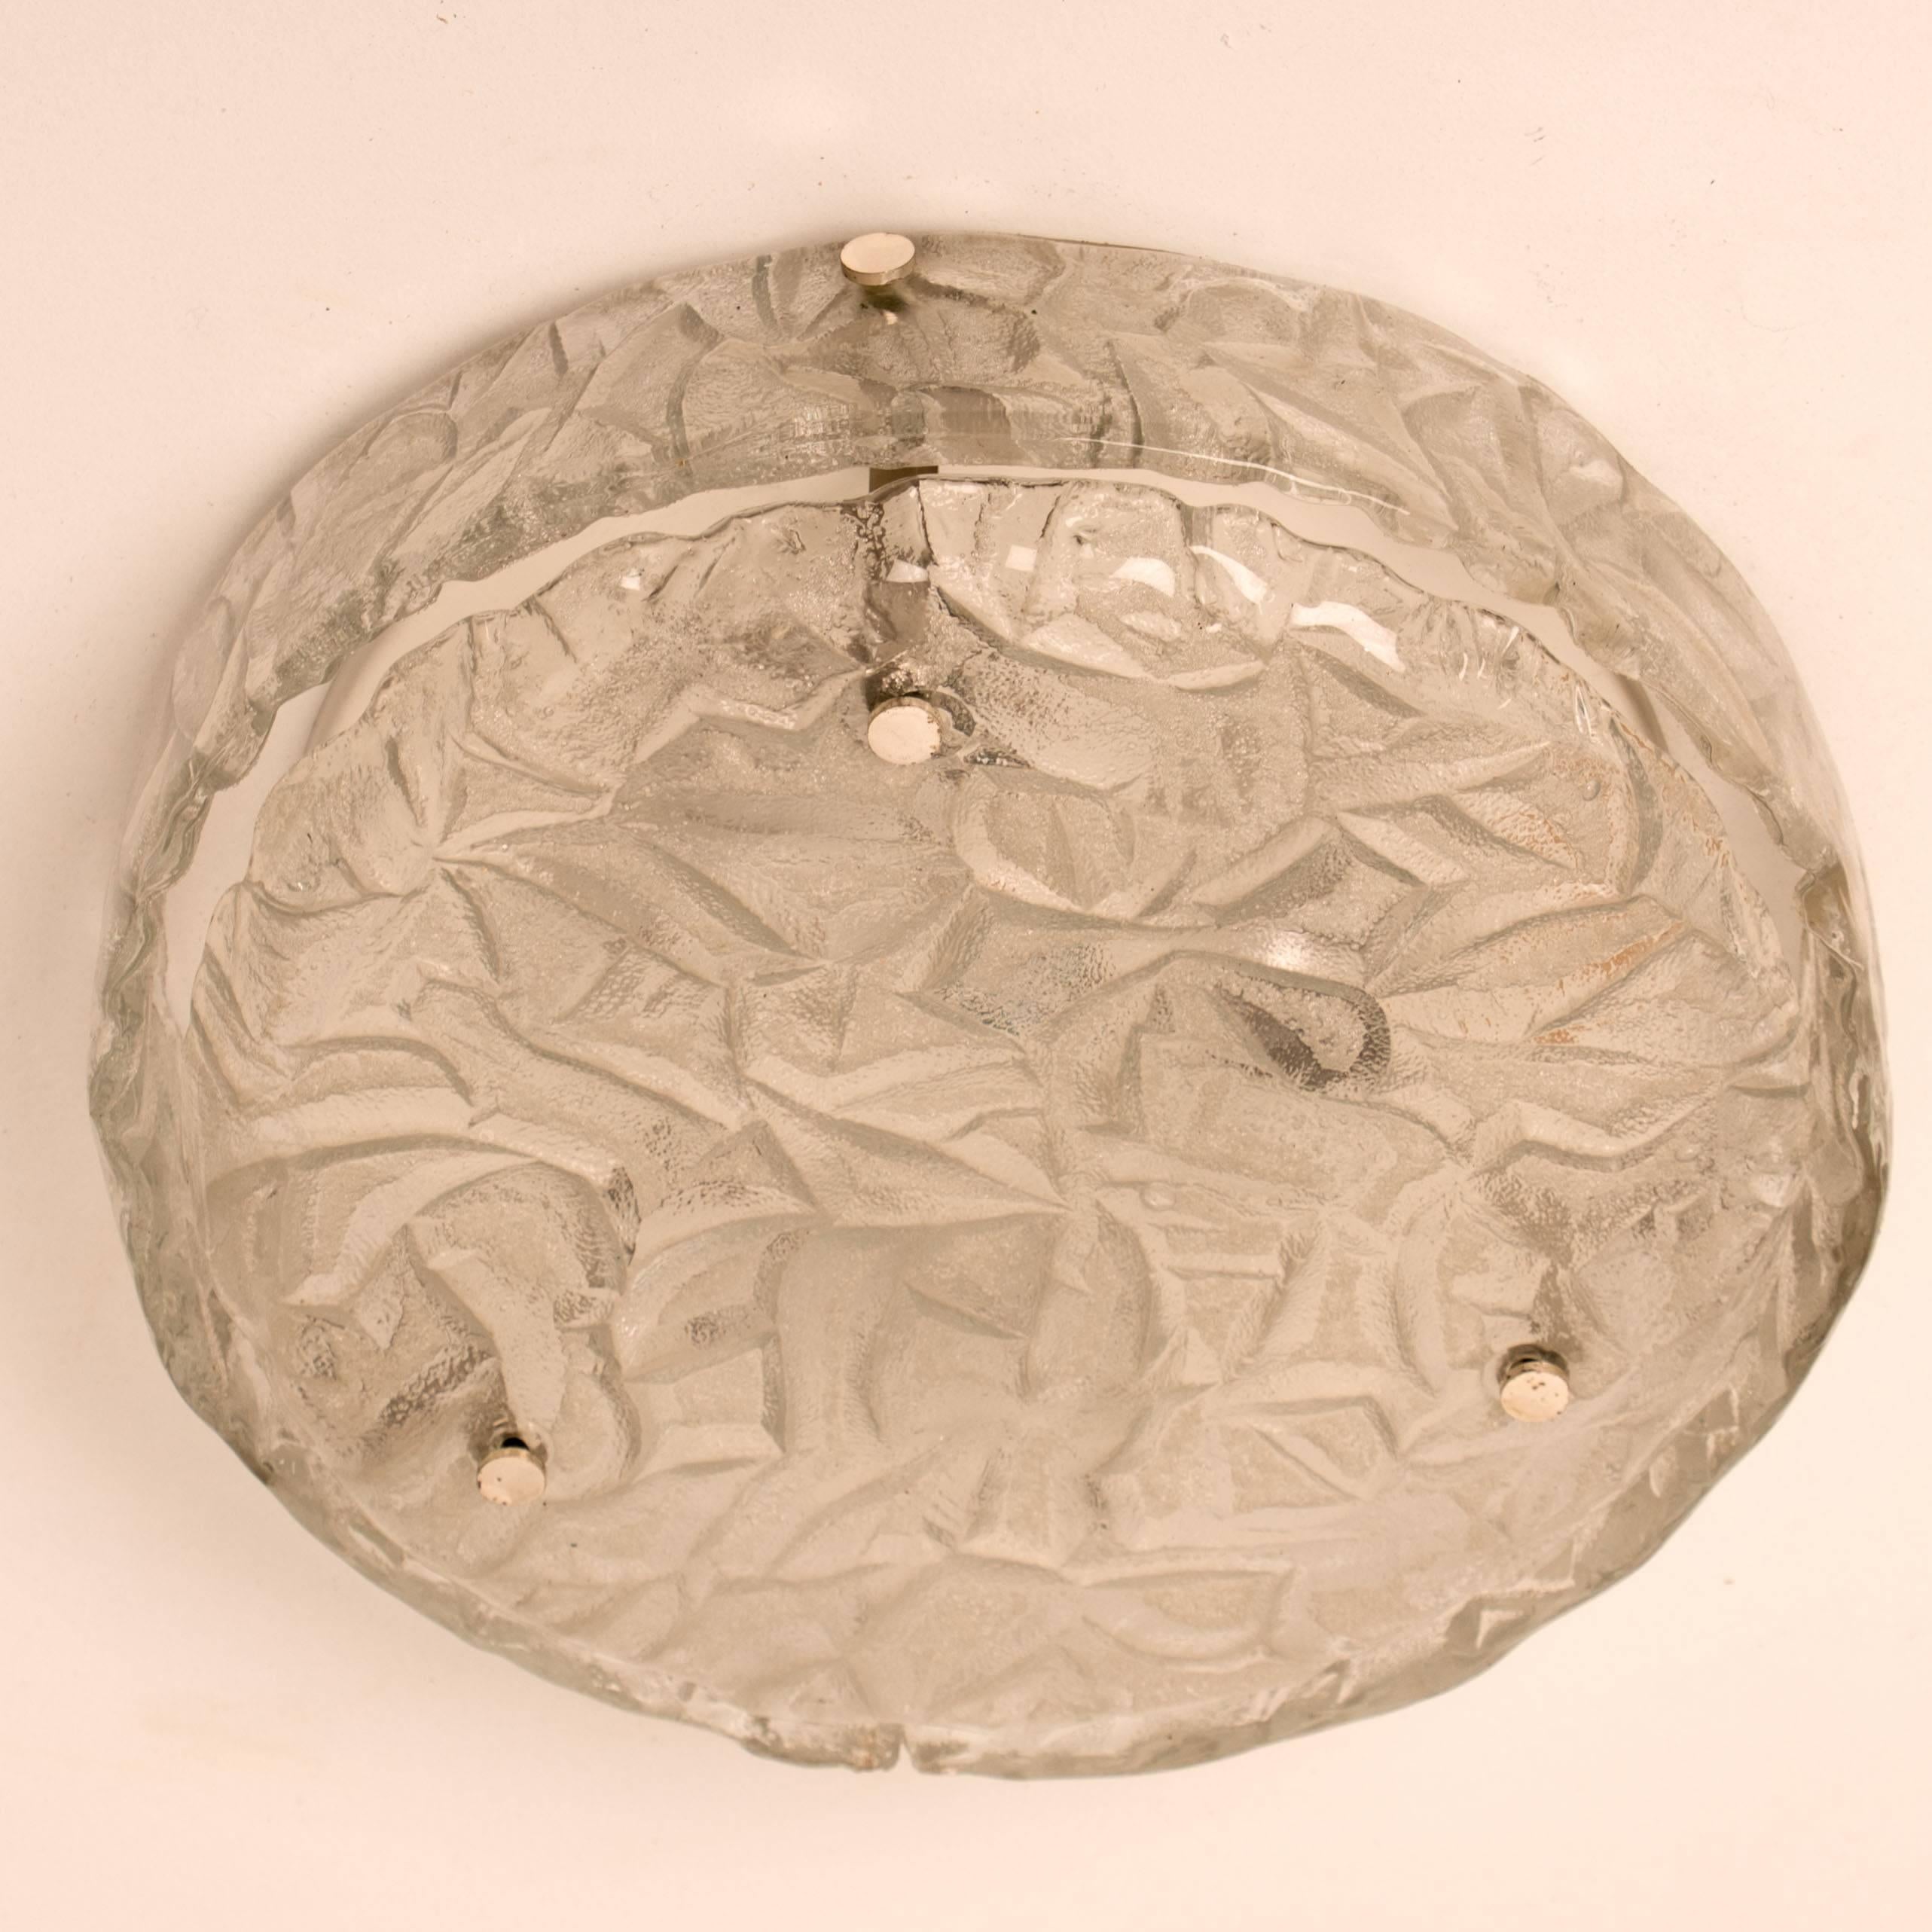 A handmade high quality light fixture made by Hillebrand, Germany, manufactured in the midcentury, circa 1970 (at the end of 1960s and beginning of 1970s). 

This flush mount or ceiling light features four sheets made of handmade, think textured